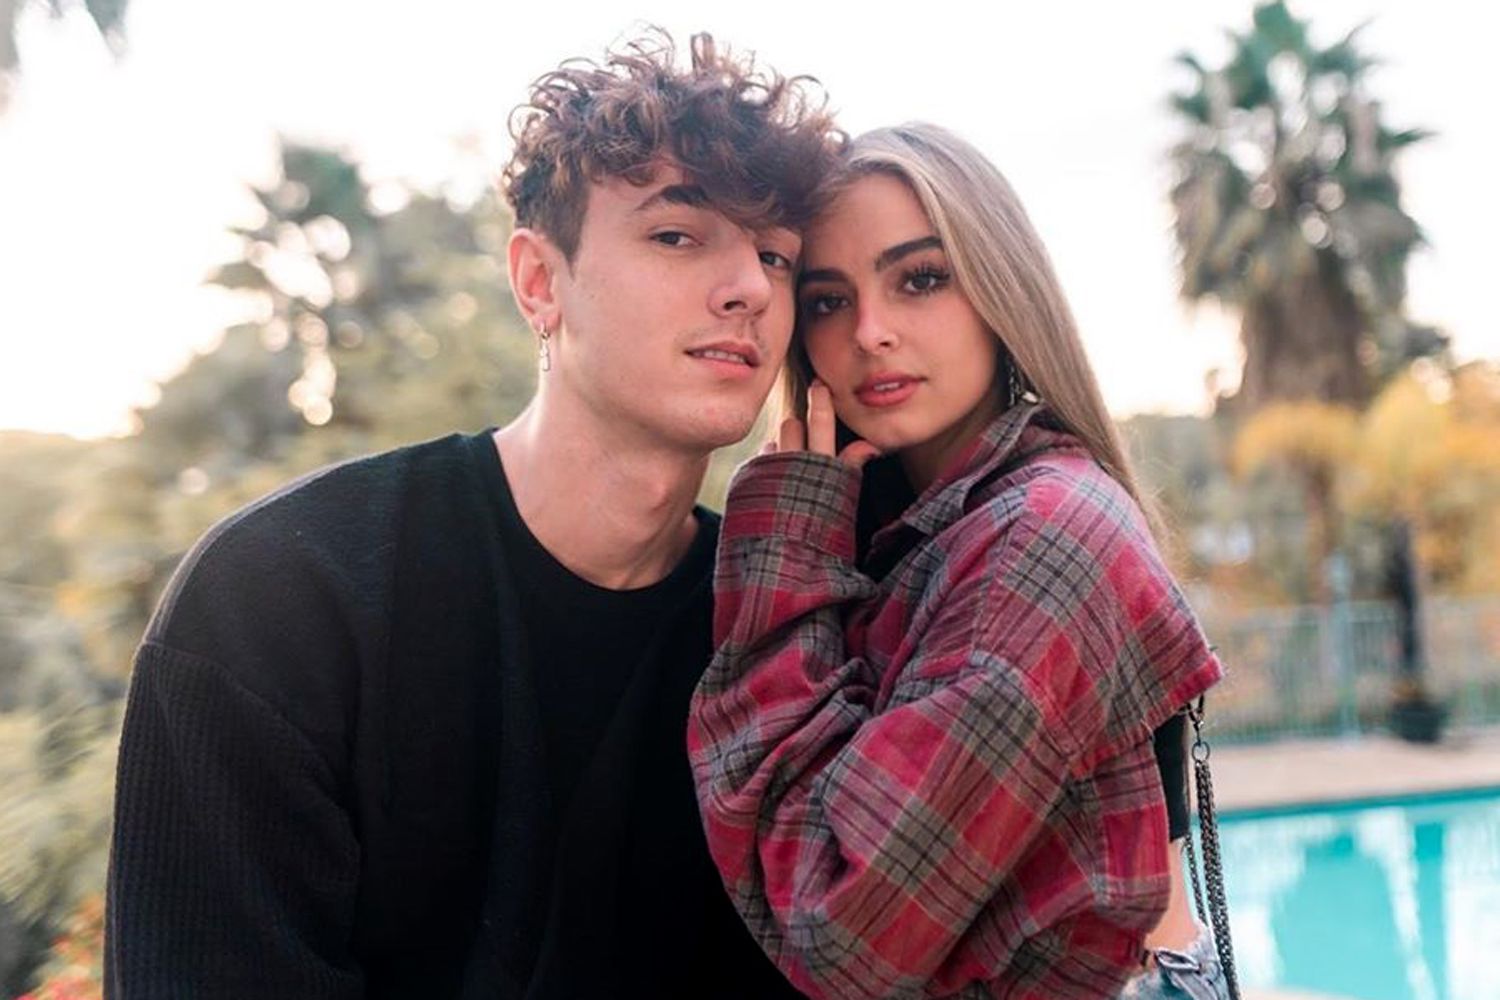 TikTok Star Bryce Hall Teases Potential Reconciliation With Ex Addison Rae